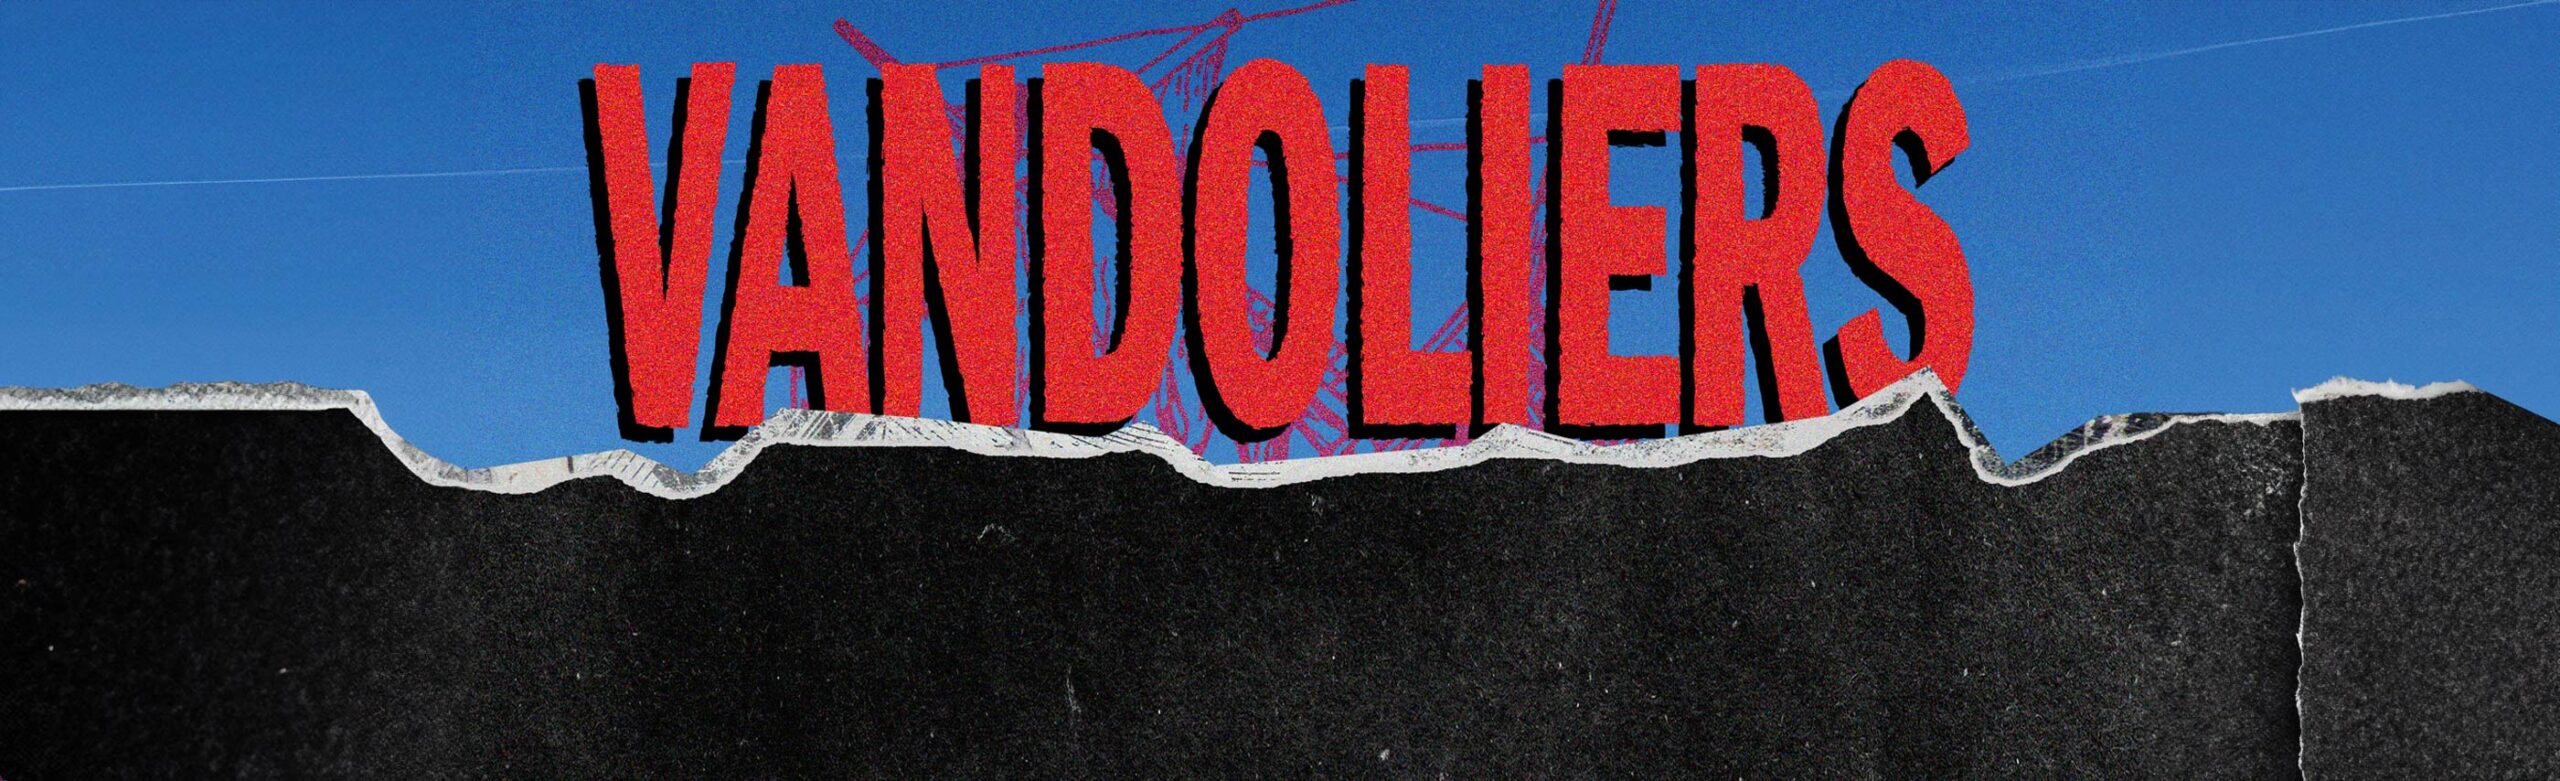 Vandoliers Announce Concert at the Rialto with Eli Howard & The Greater Good Image